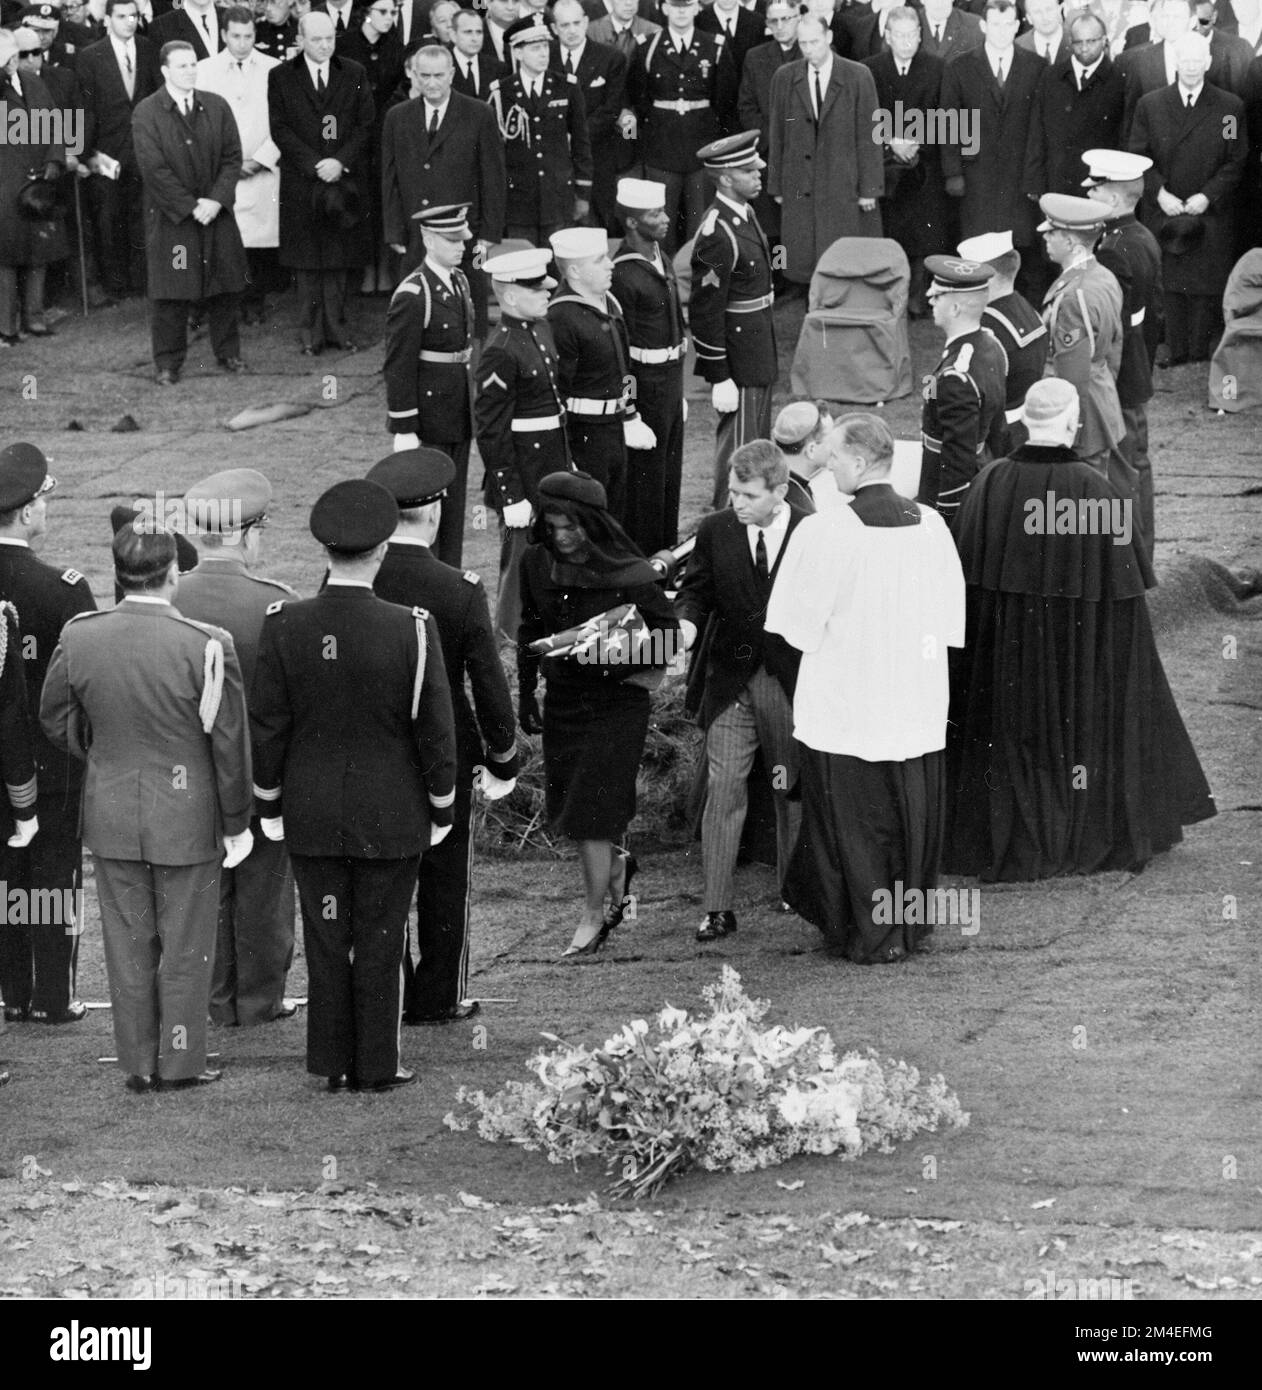 Jacqueline Kennedy and Attorney General Robert F. Kennedy walk away from President Kennedy's casket during interment at Arlington National Cemetery on November 25, 1963. Stock Photo